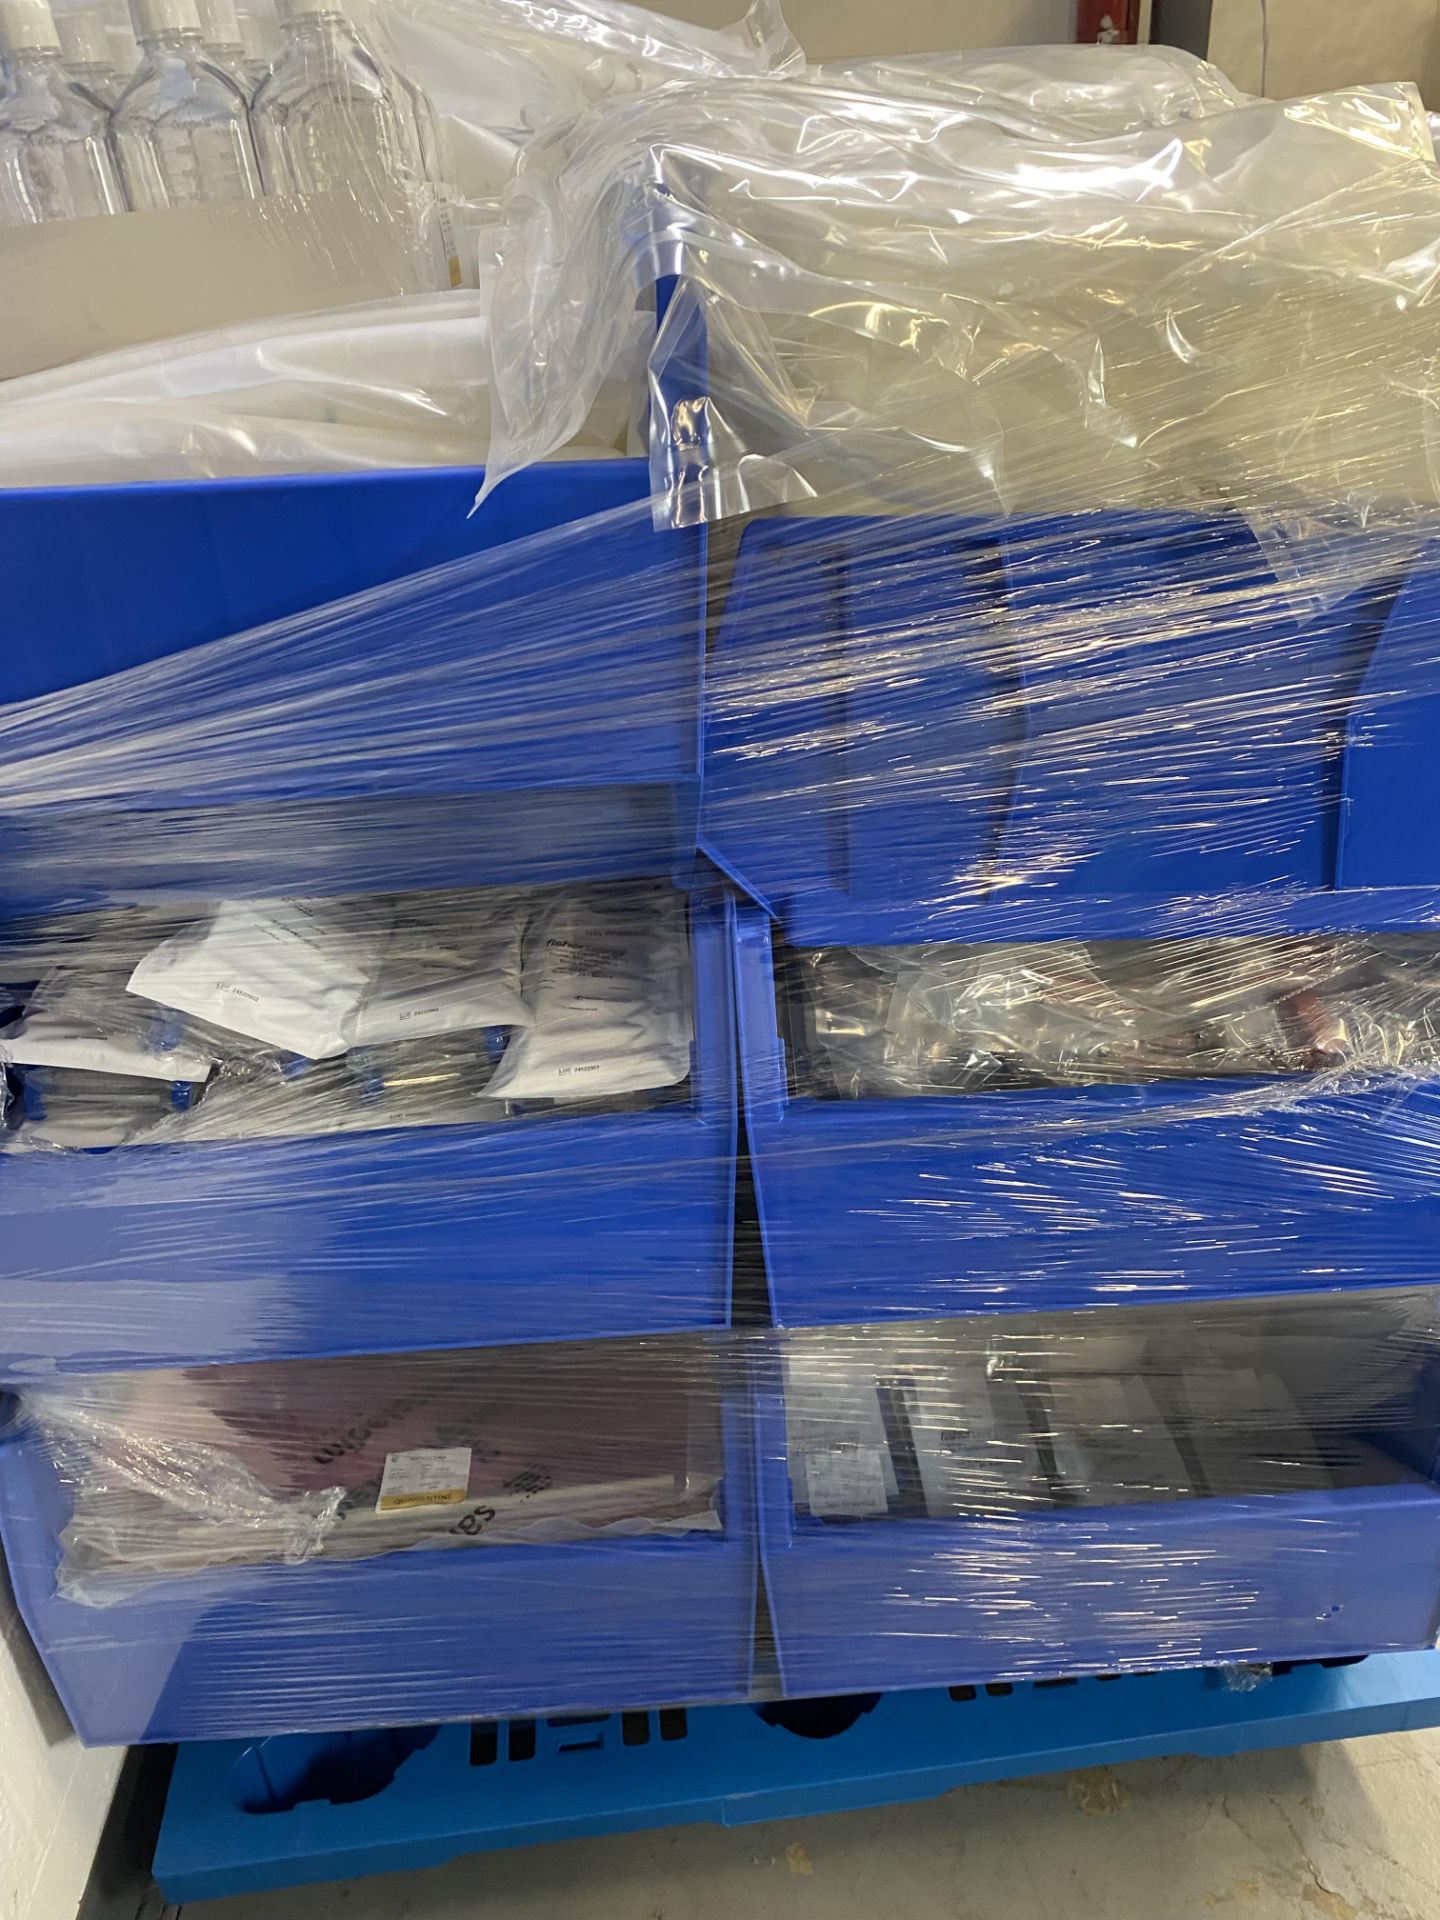 {LOT} Of Consumables on Pallet of Approx. 6 Boxes c/o: Thermo Scientific Bottles, Film and Tubes, - Bild 2 aus 2